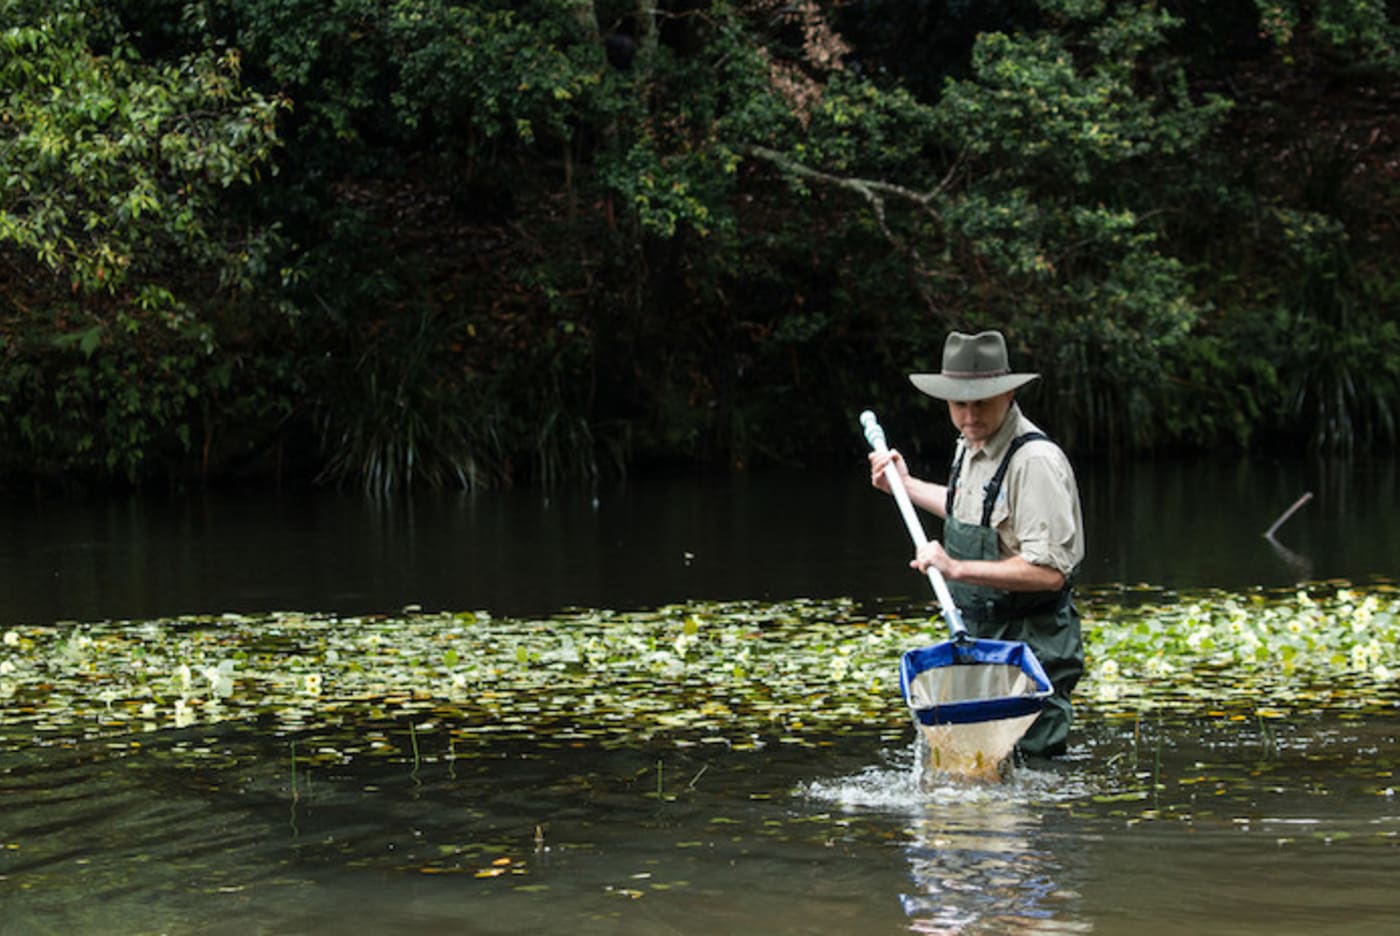 Patrick Giumelli from WWF-Australia collects aquatic macroinvertebrates from a creek in the Royal National Park